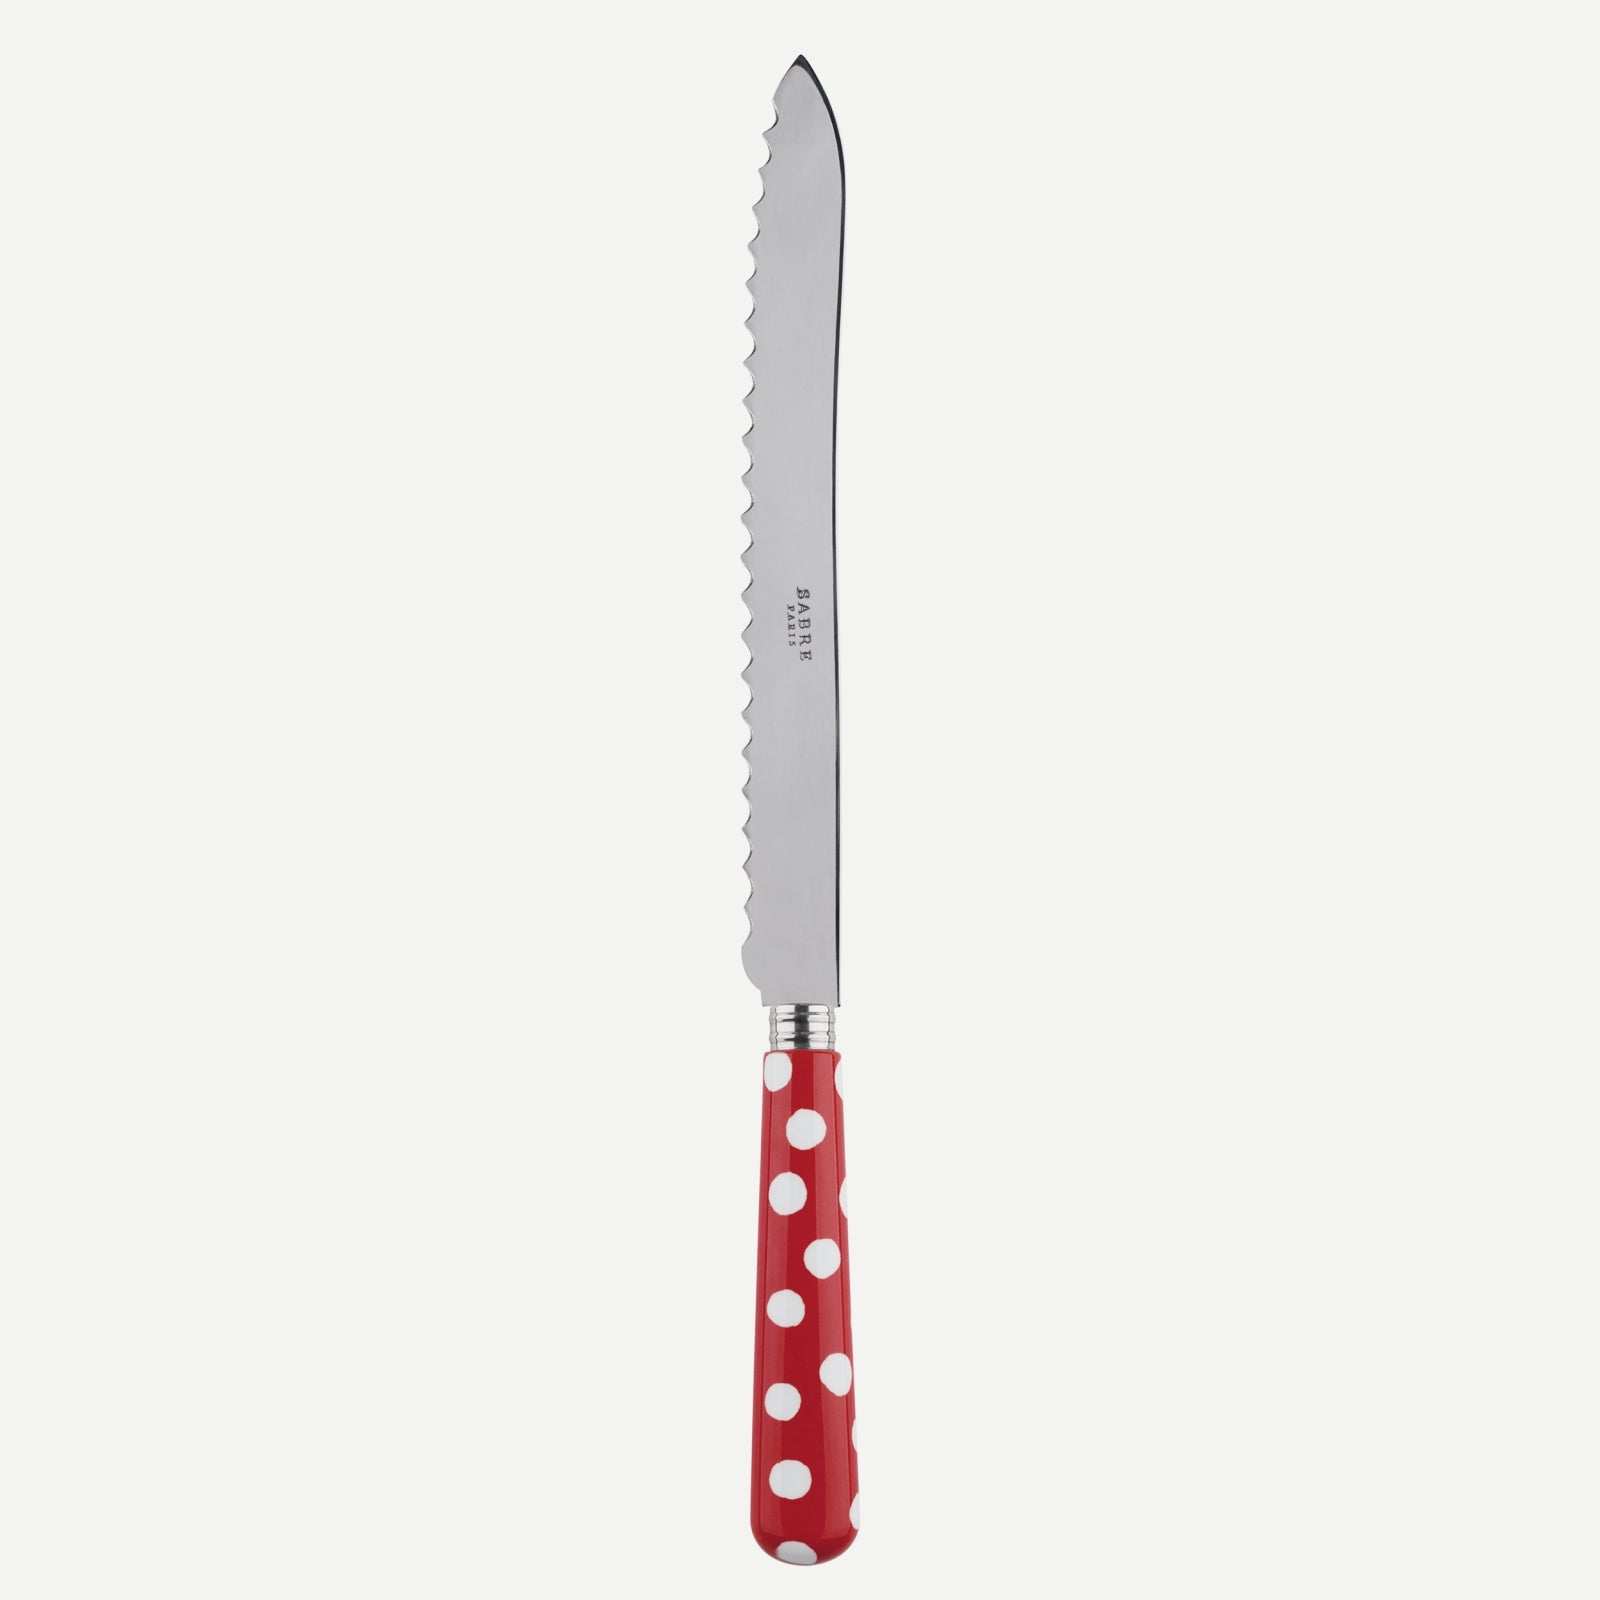 Bread knife - White Dots. - Red